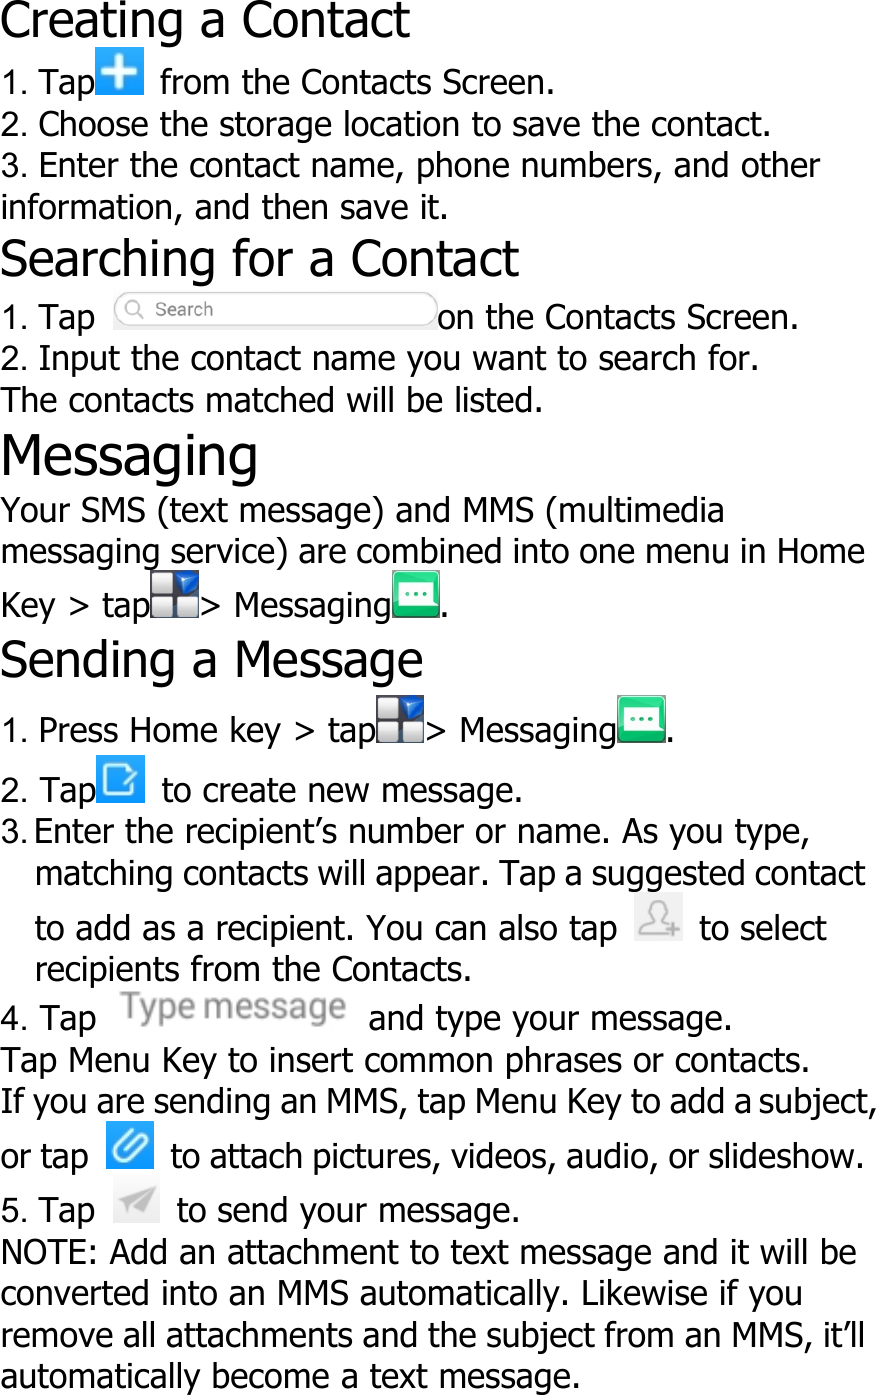 Creating a Contact1. Tap from the Contacts Screen.2. Choose the storage location to save the contact.3. Enter the contact name, phone numbers, and otherinformation, and then save it.Searching for a Contact1. Tap on the Contacts Screen.2. Input the contact name you want to search for.The contacts matched will be listed.MessagingYour SMS (text message) and MMS (multimediamessaging service) are combined into one menu in HomeKey &gt; tap &gt; Messaging .Sending a Message1. Press Home key &gt; tap &gt; Messaging .2. Tap to create new message.3. Enter the recipient’s number or name. As you type,matching contacts will appear. Tap a suggested contactto add as a recipient. You can also tap to selectrecipients from the Contacts.4. Tap and type your message.Tap Menu Key to insert common phrases or contacts.If you are sending an MMS, tap Menu Key to add a subject,or tap to attach pictures, videos, audio, or slideshow.5. Tap to send your message.NOTE: Add an attachment to text message and it will beconverted into an MMS automatically. Likewise if youremove all attachments and the subject from an MMS, it’llautomatically become a text message.